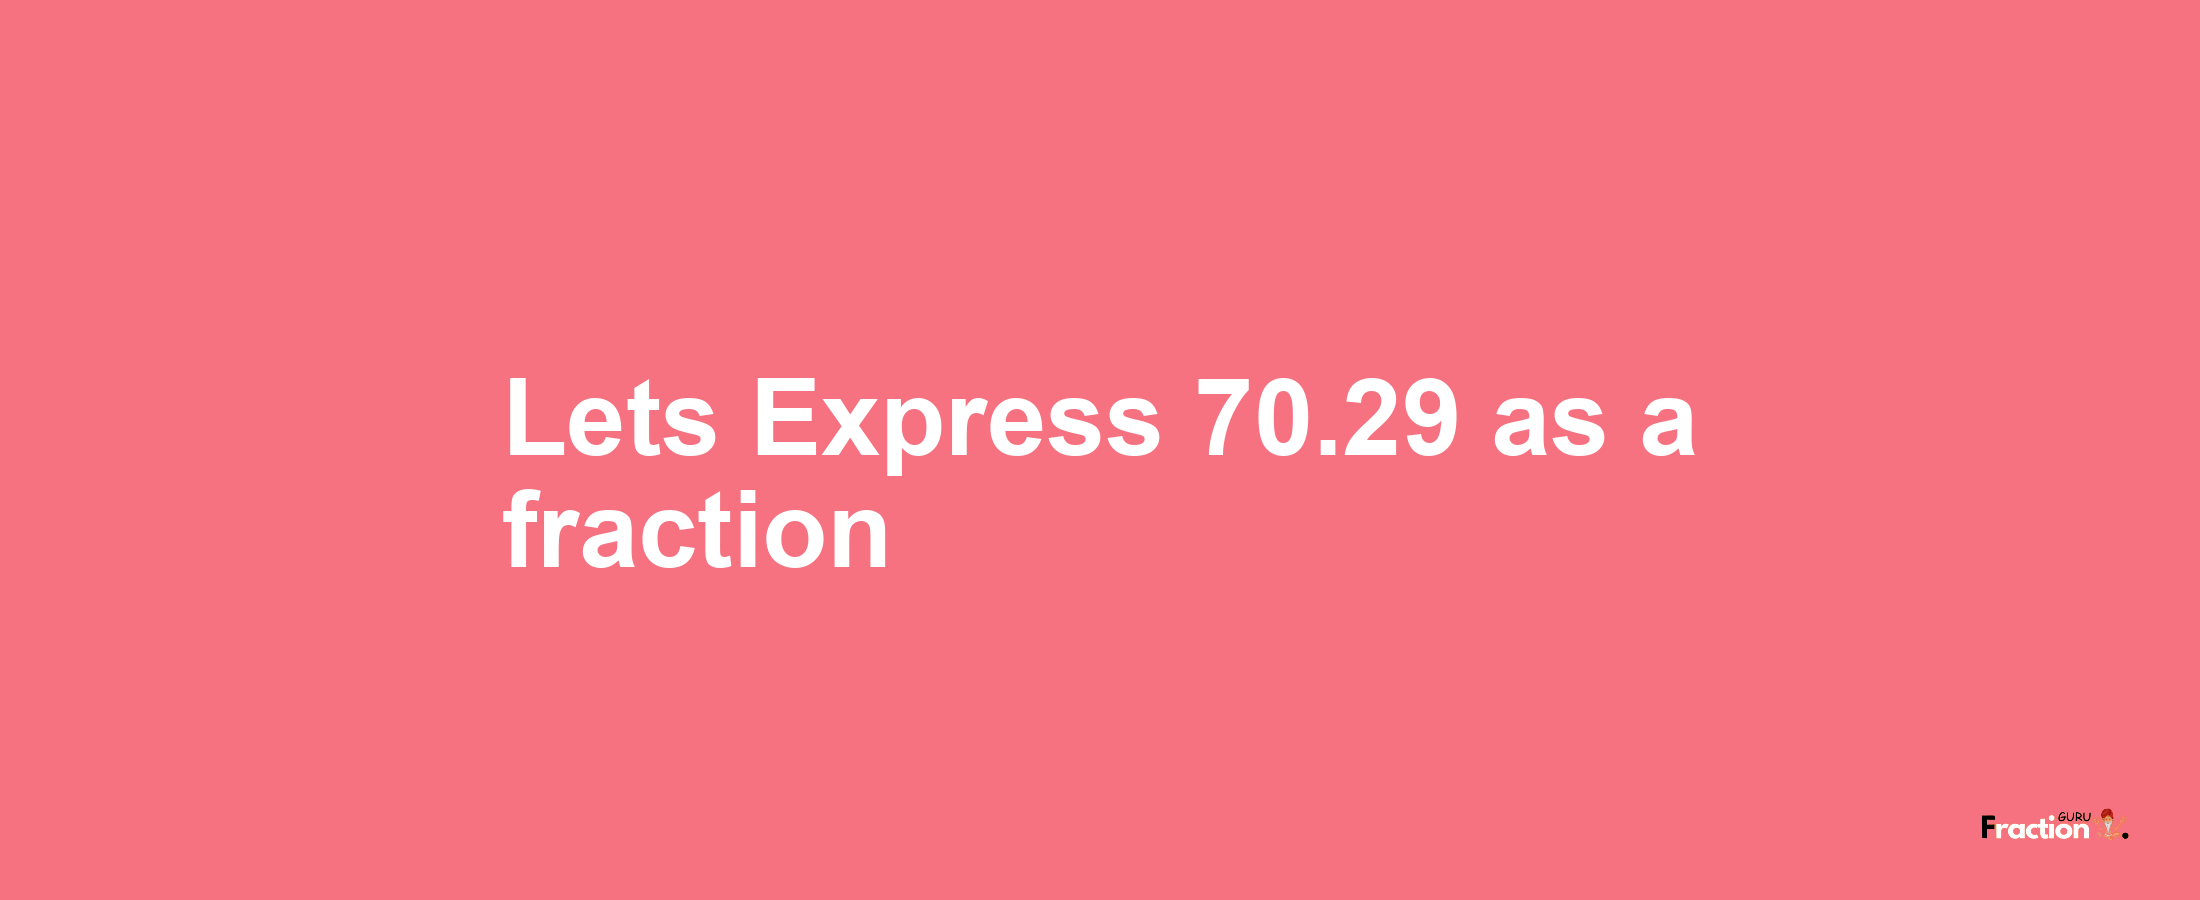 Lets Express 70.29 as afraction